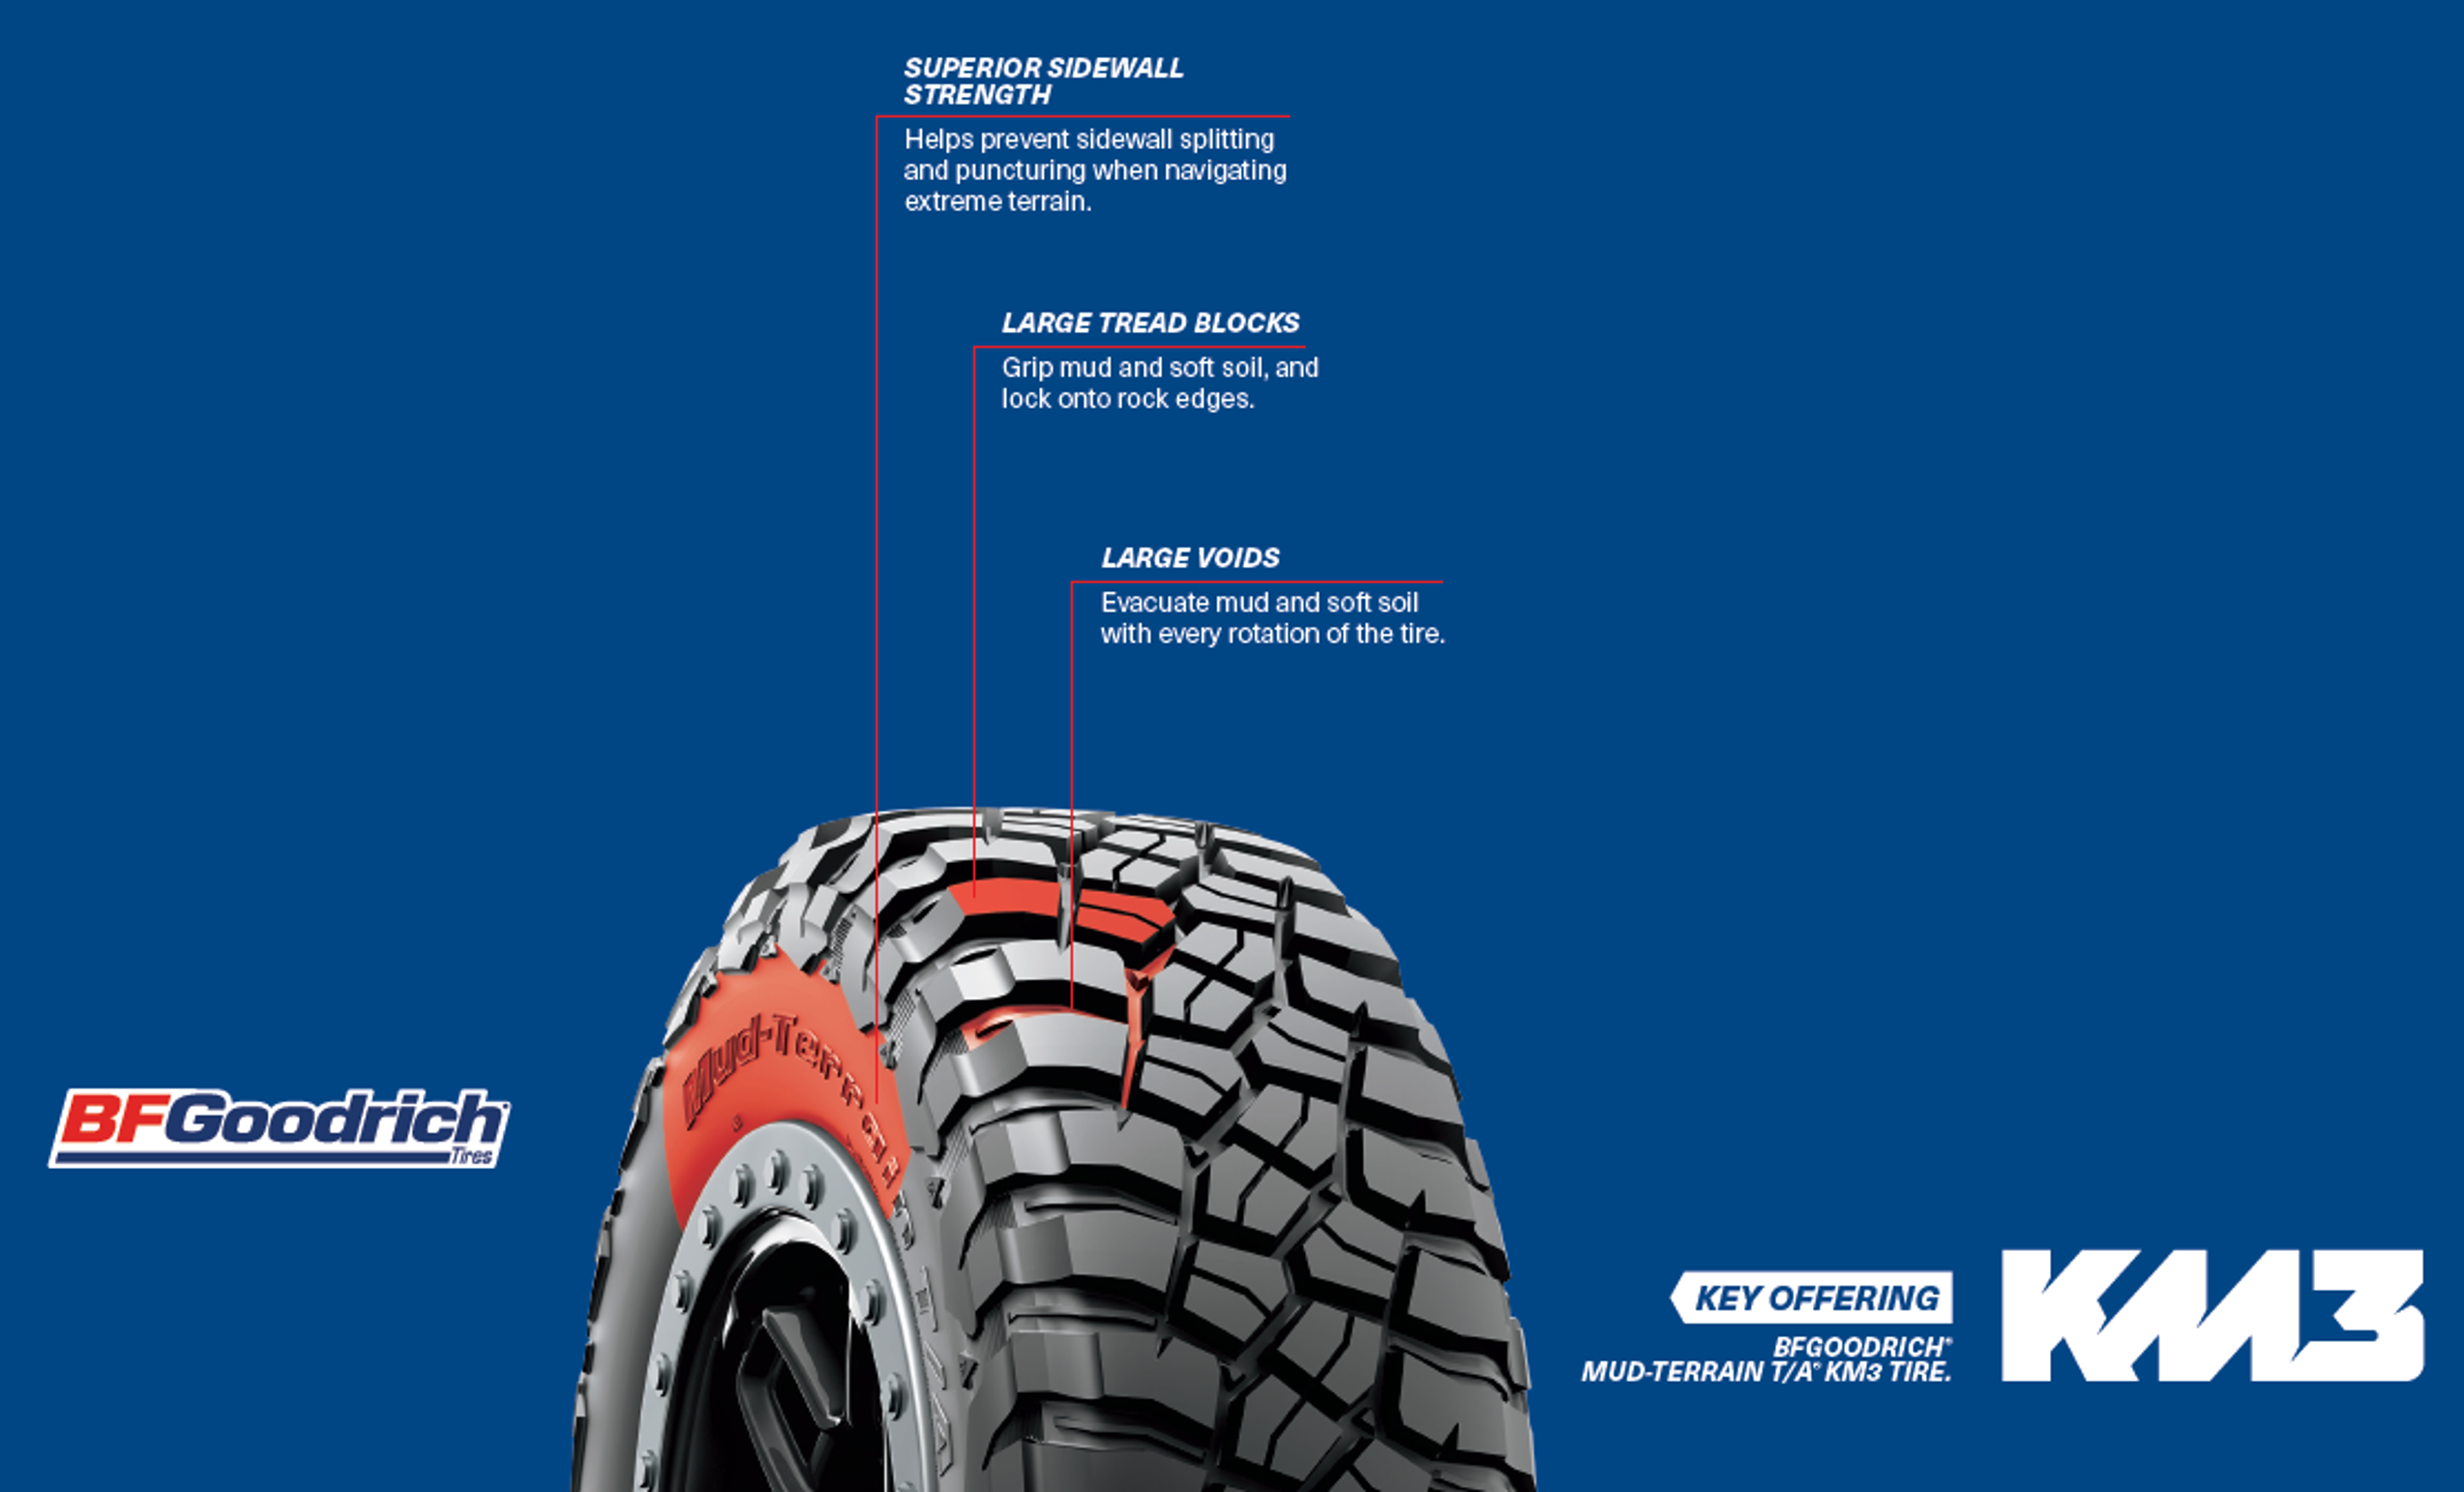 BFGOODRICH MUD-TERRAIN T/A KM3 TIRE Superior Sidewall Strength - Helps prevent sidewall splitting and puncturing when navigating extreme terrain. Large Tread Blocks - Grip mud and soft soil, and lock onto rock edges. Large Voids - Evacuate mud and soft soil with every rotation of the tire.